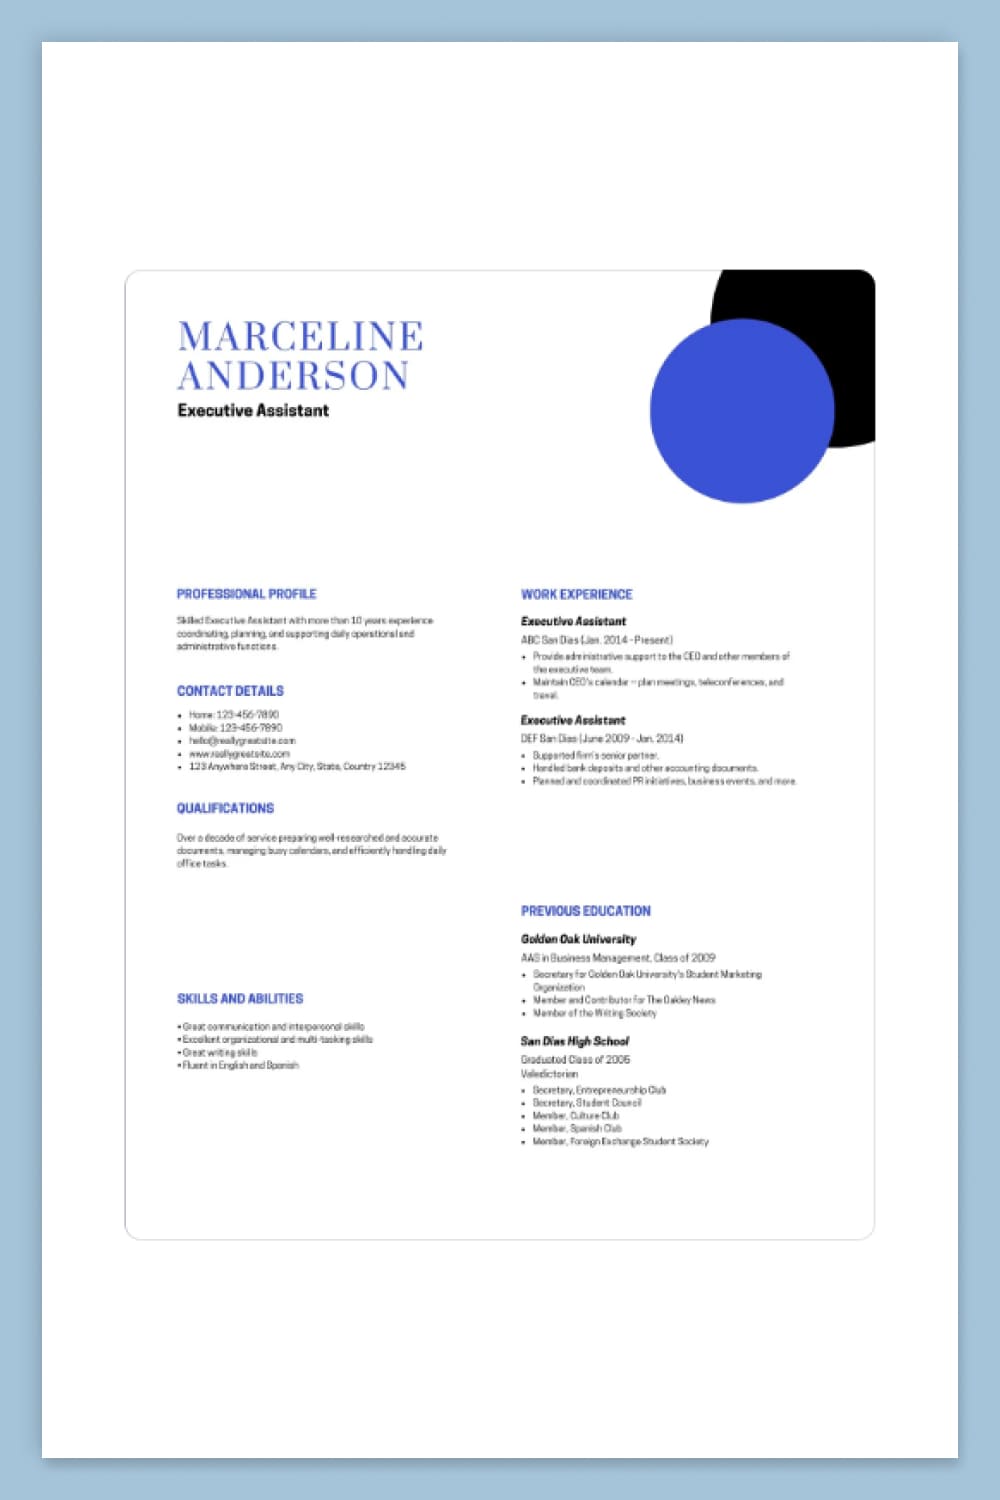 Minimalist two-column resume with black and blue elements.